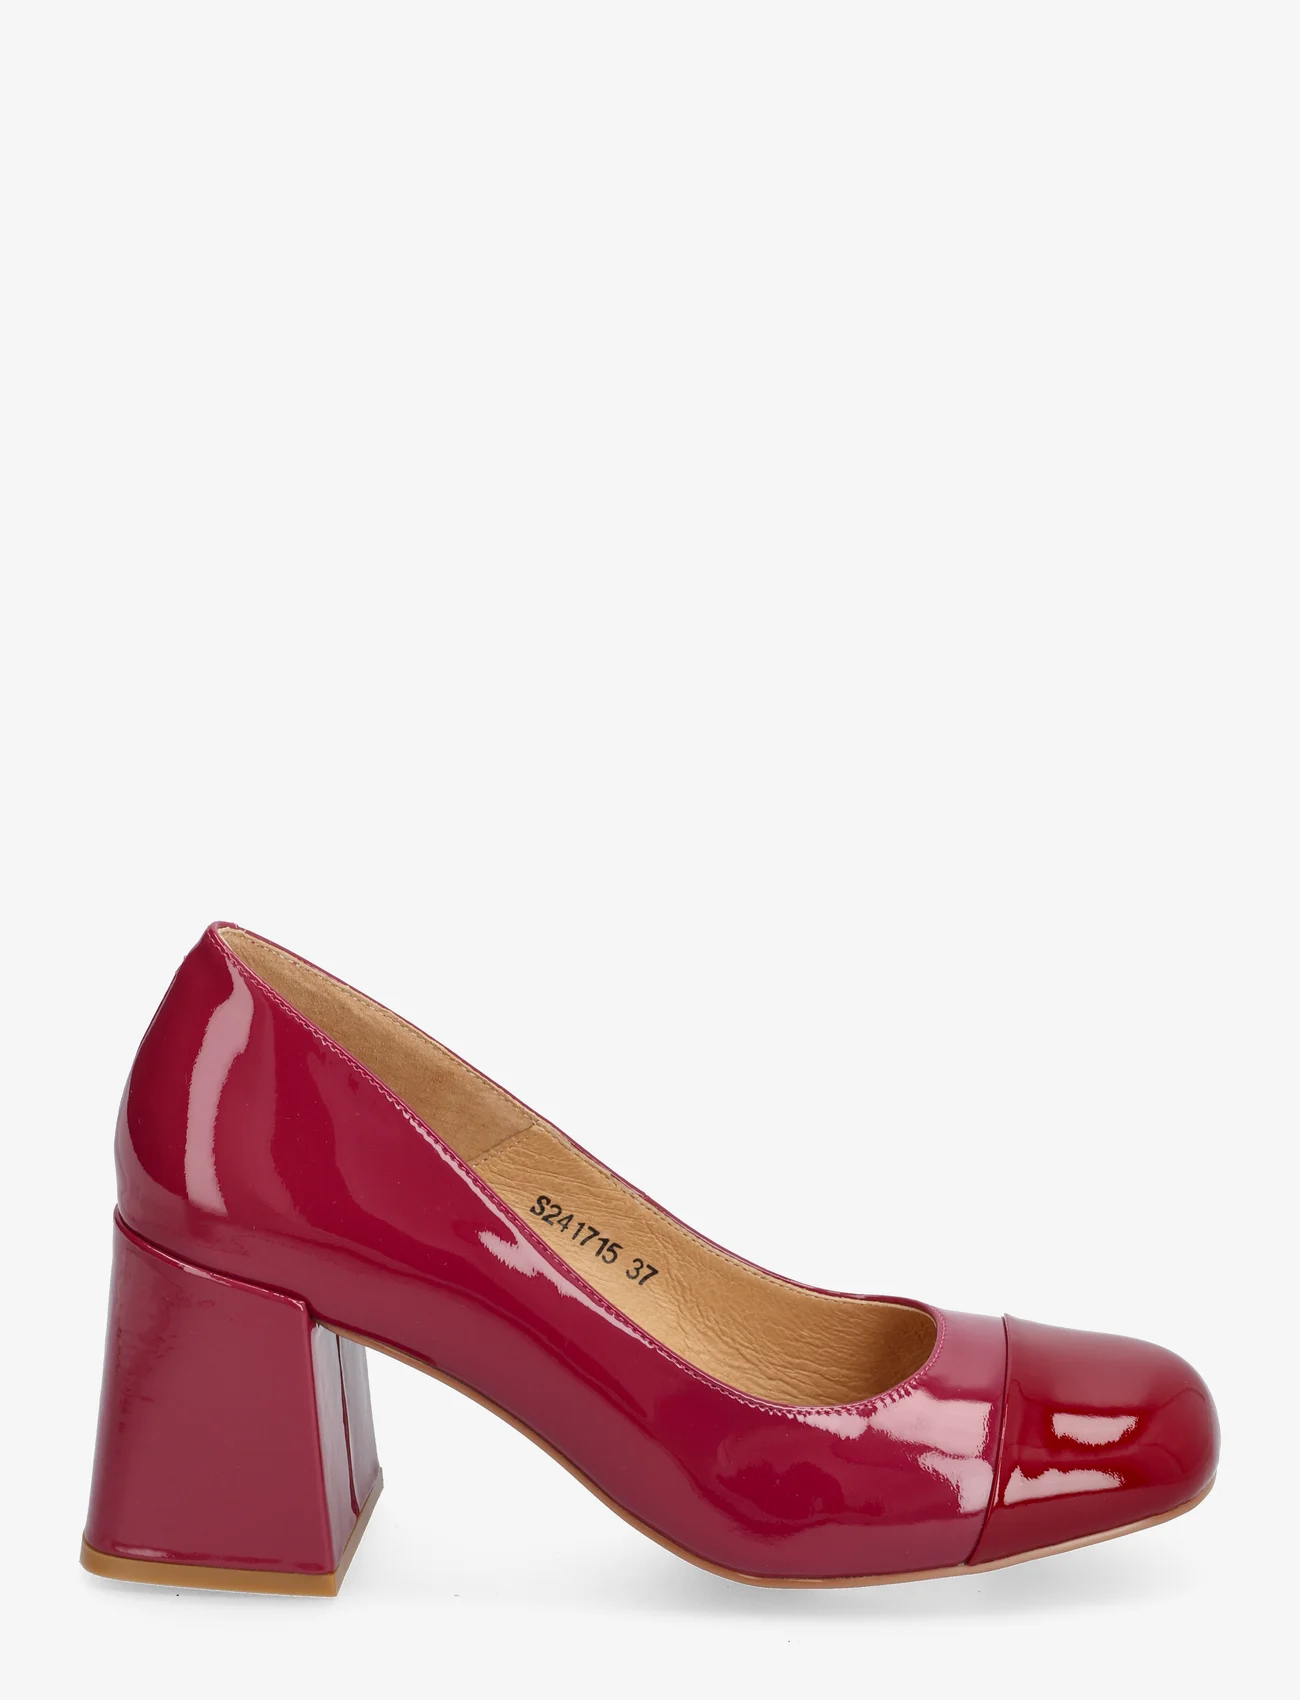 Sofie Schnoor - Stiletto - party wear at outlet prices - berry red - 1